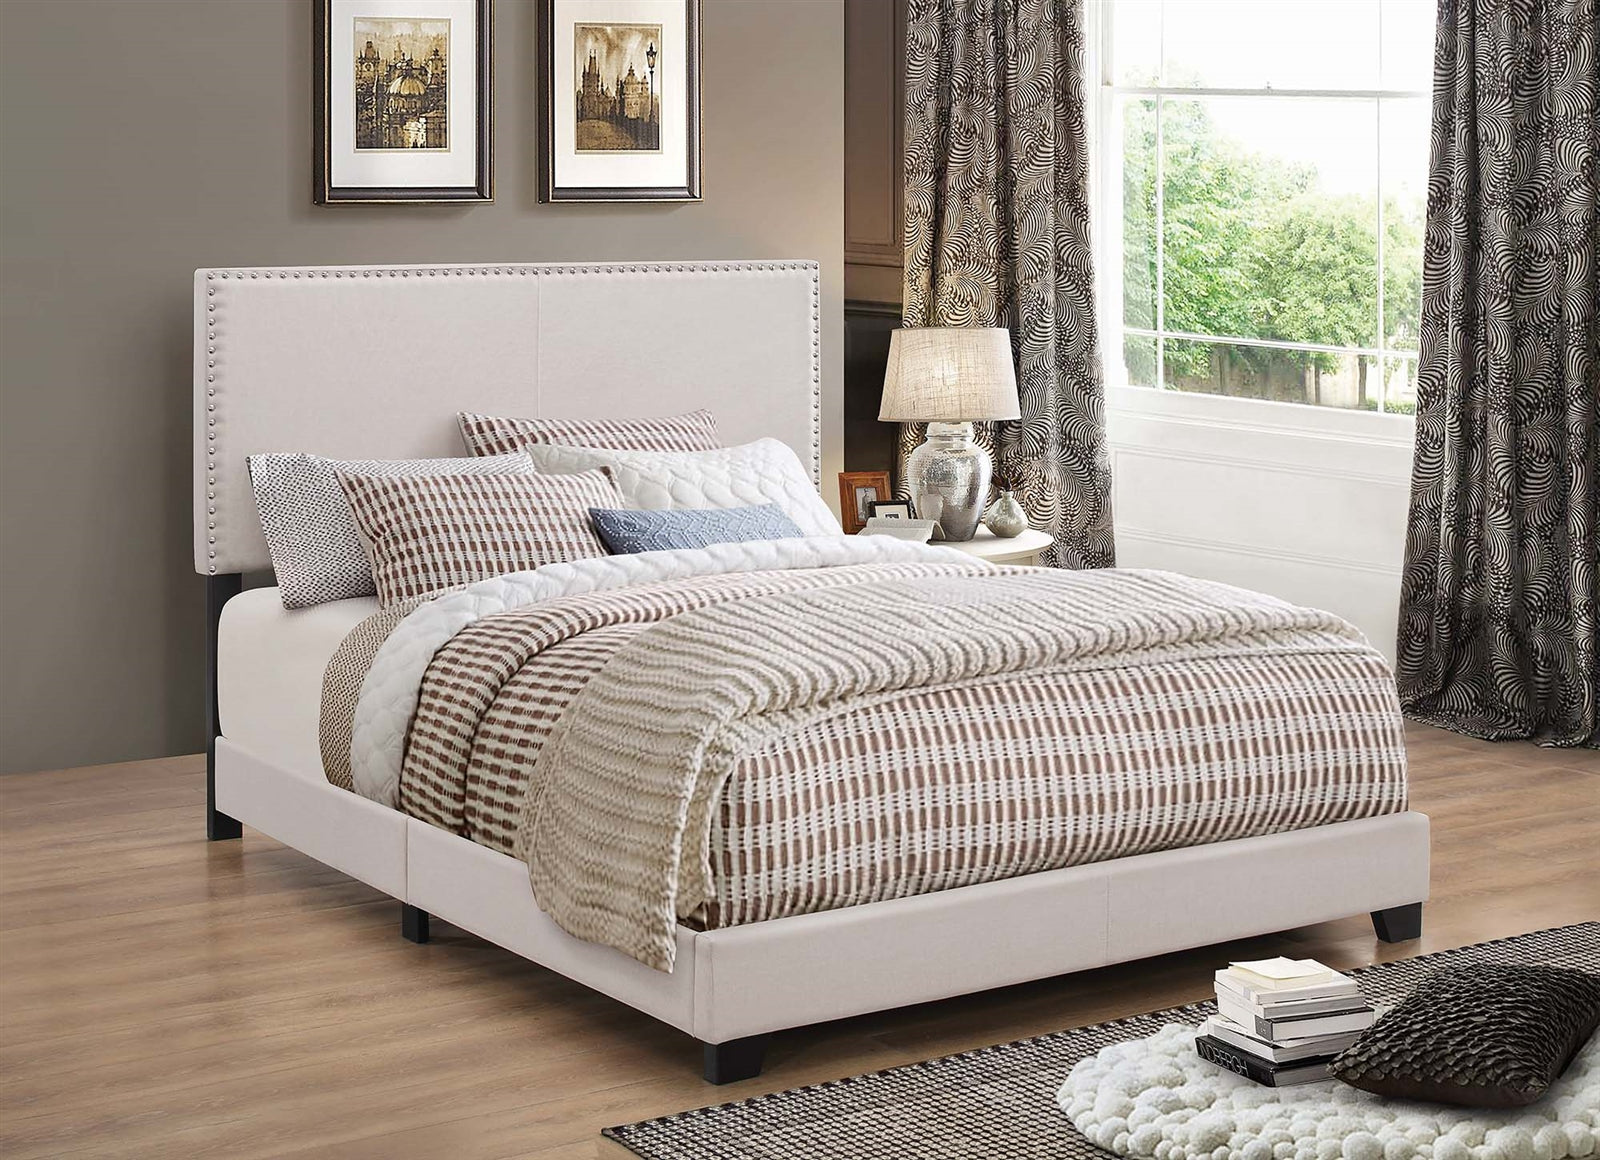 Indi Ivory Upholstered King Bed with Nailhead Trim